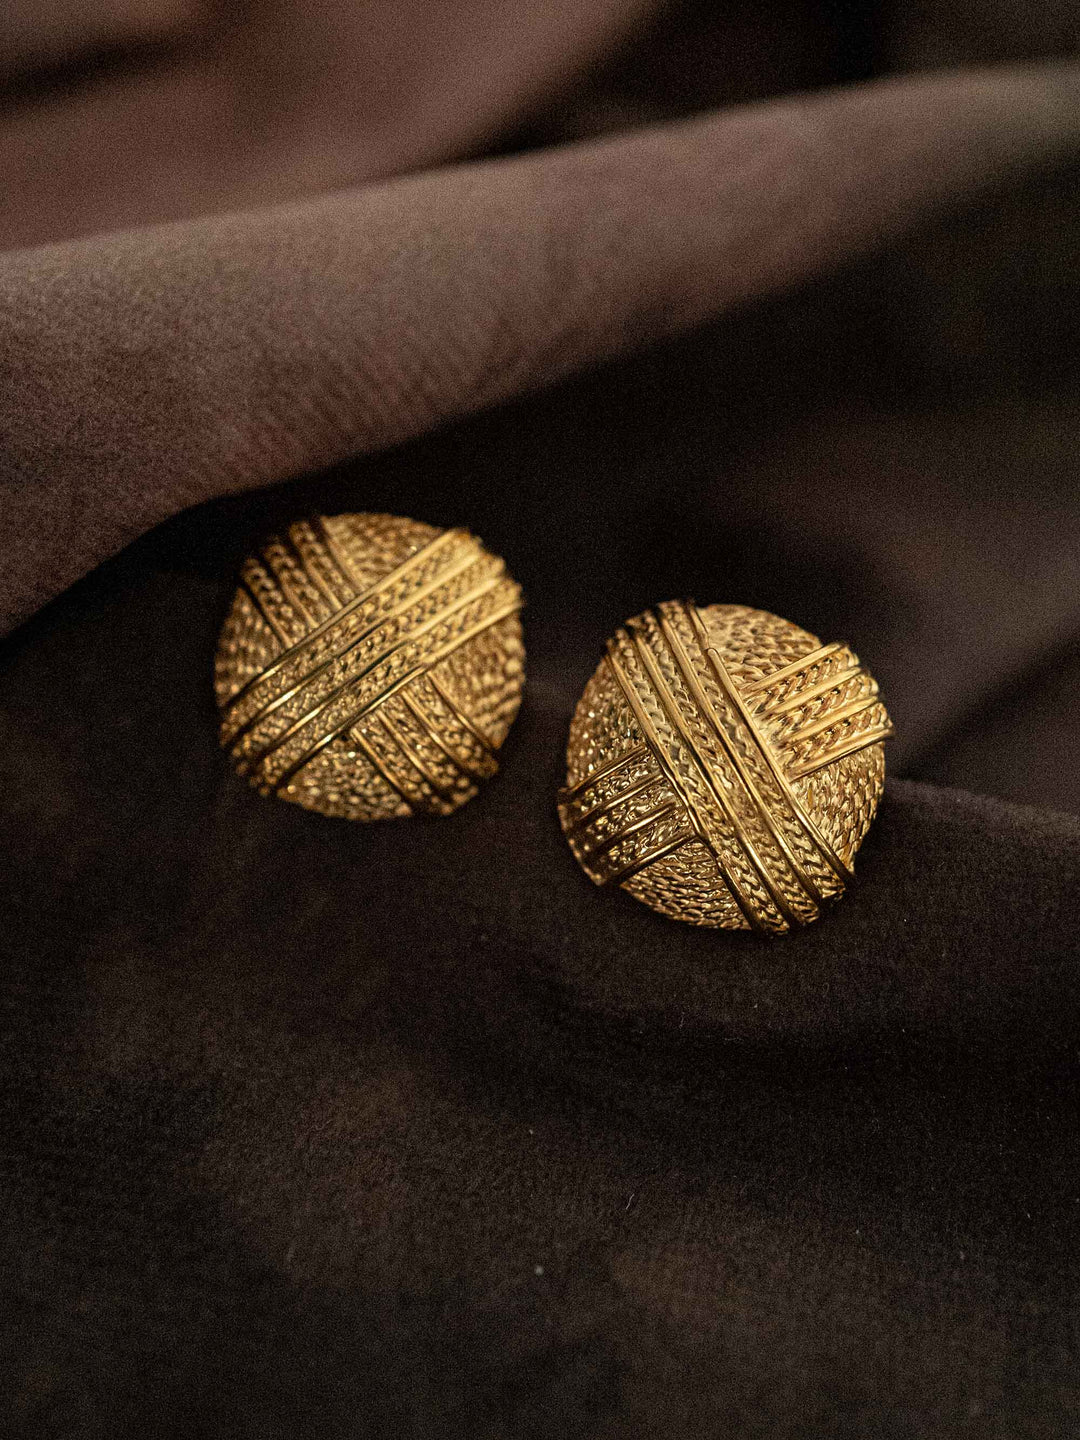 A round gold earring with a criss-cross pattern